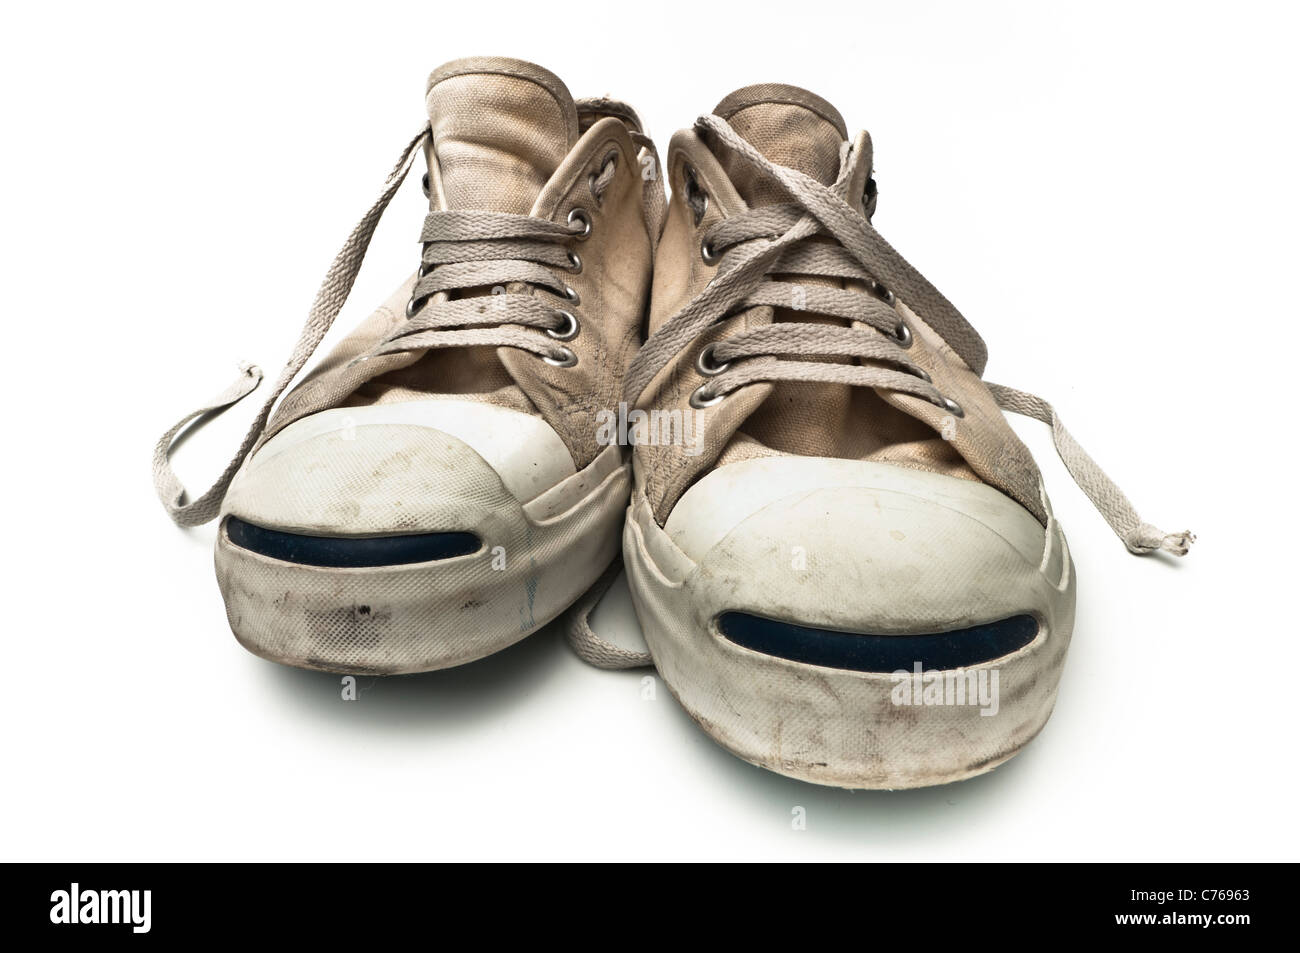 Converse Jack Purcell tennis shoes on a white background Stock Photo